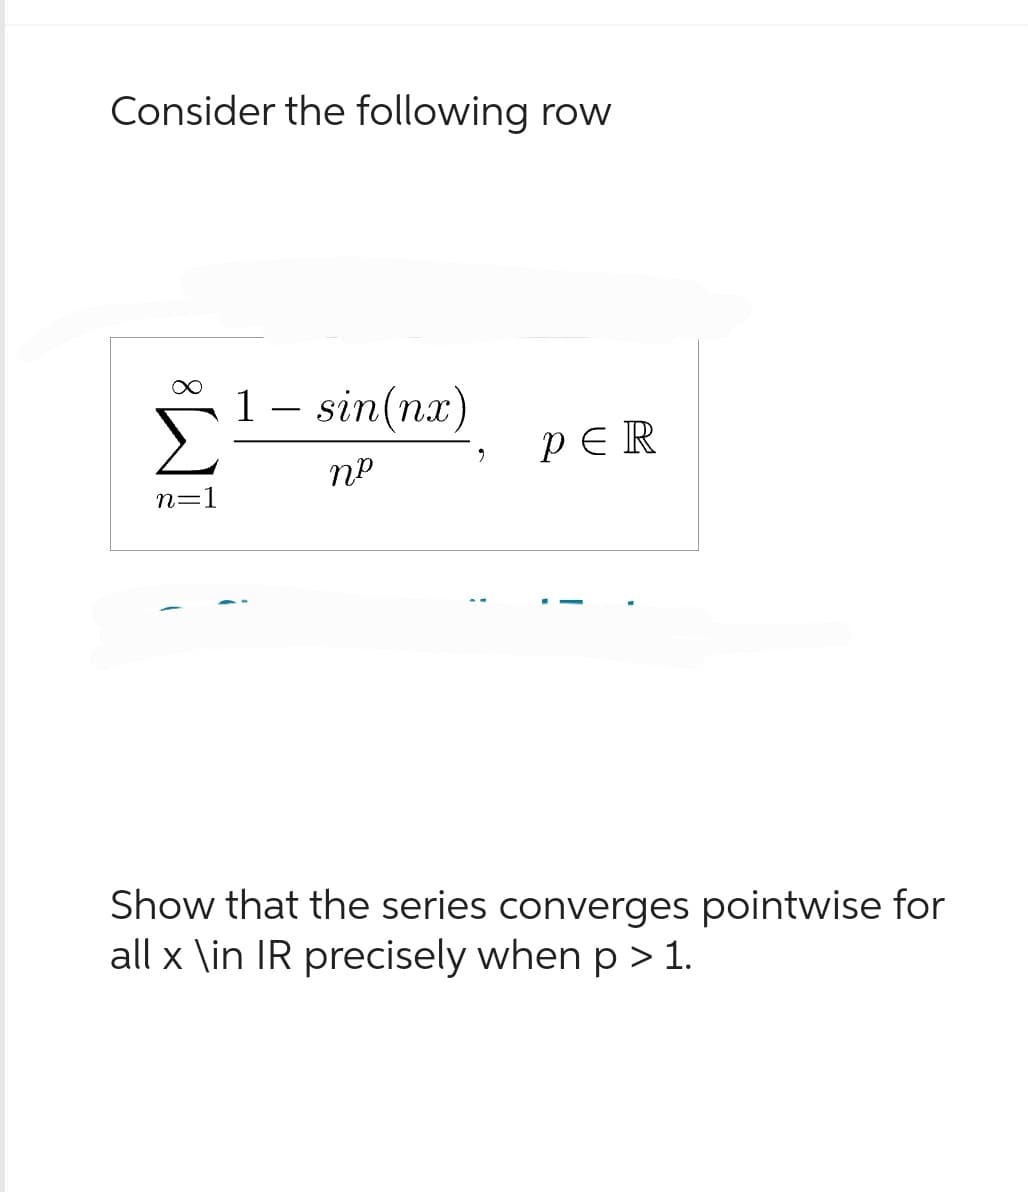 Consider the following row
n=1
1 sin(nx)
пр
9
PER
Show that the series converges pointwise for
all x \in IR precisely when p > 1.